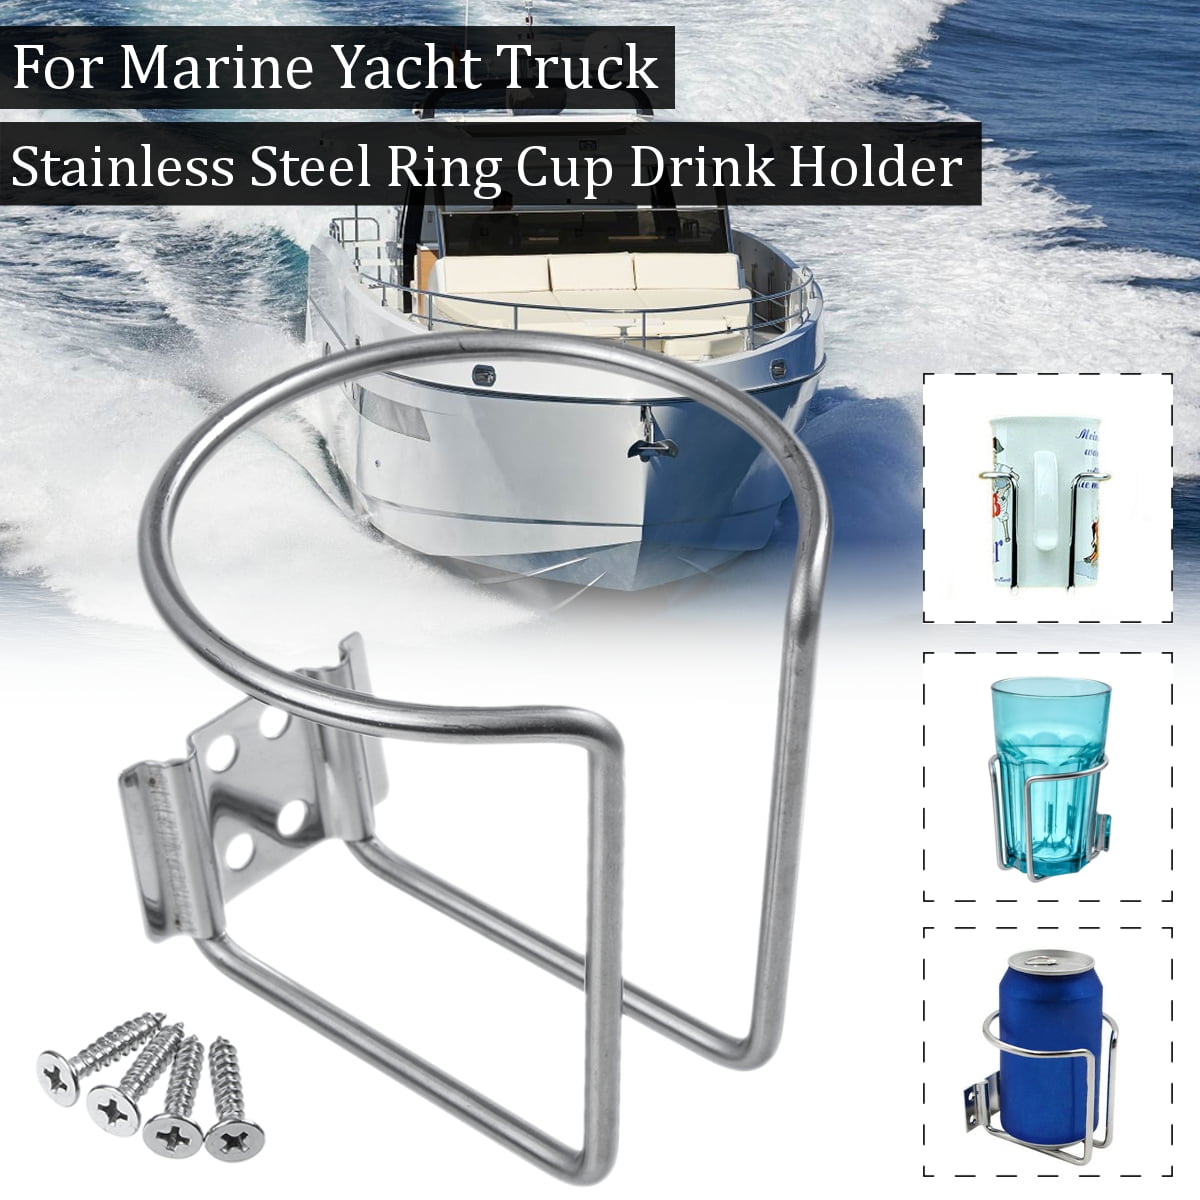 Z-Color Stainless Steel Boat Ring Cup Drink Holder Universal Drinks Holders for Marine Yacht Truck RV Car Trailer Hardware